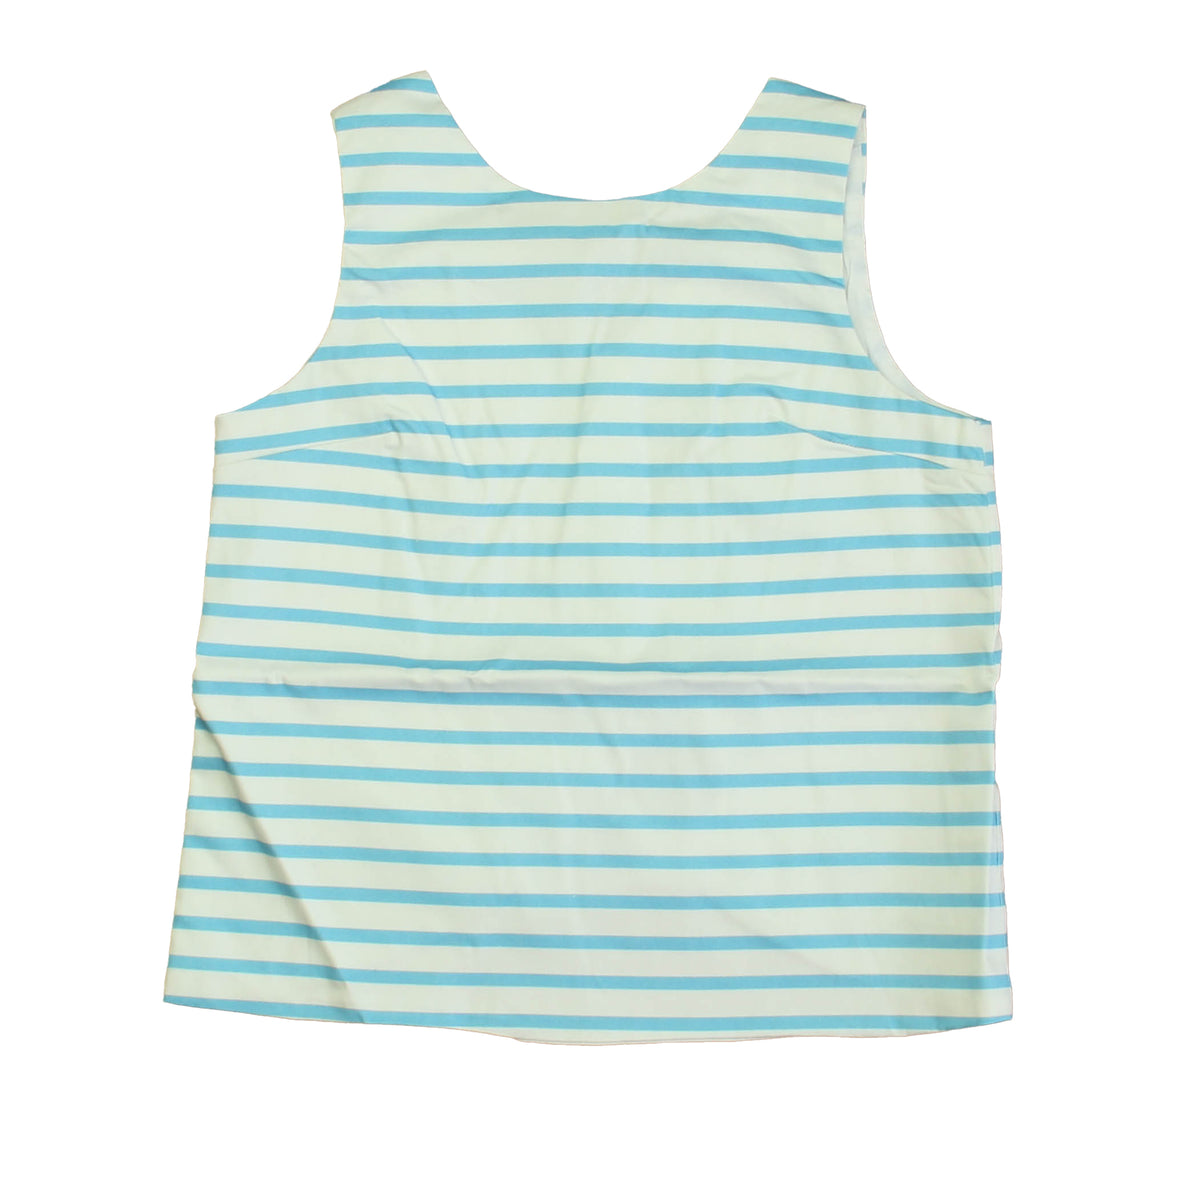 New with Tags: Robins Egg Picnic Stripe Top -- FINAL SALE